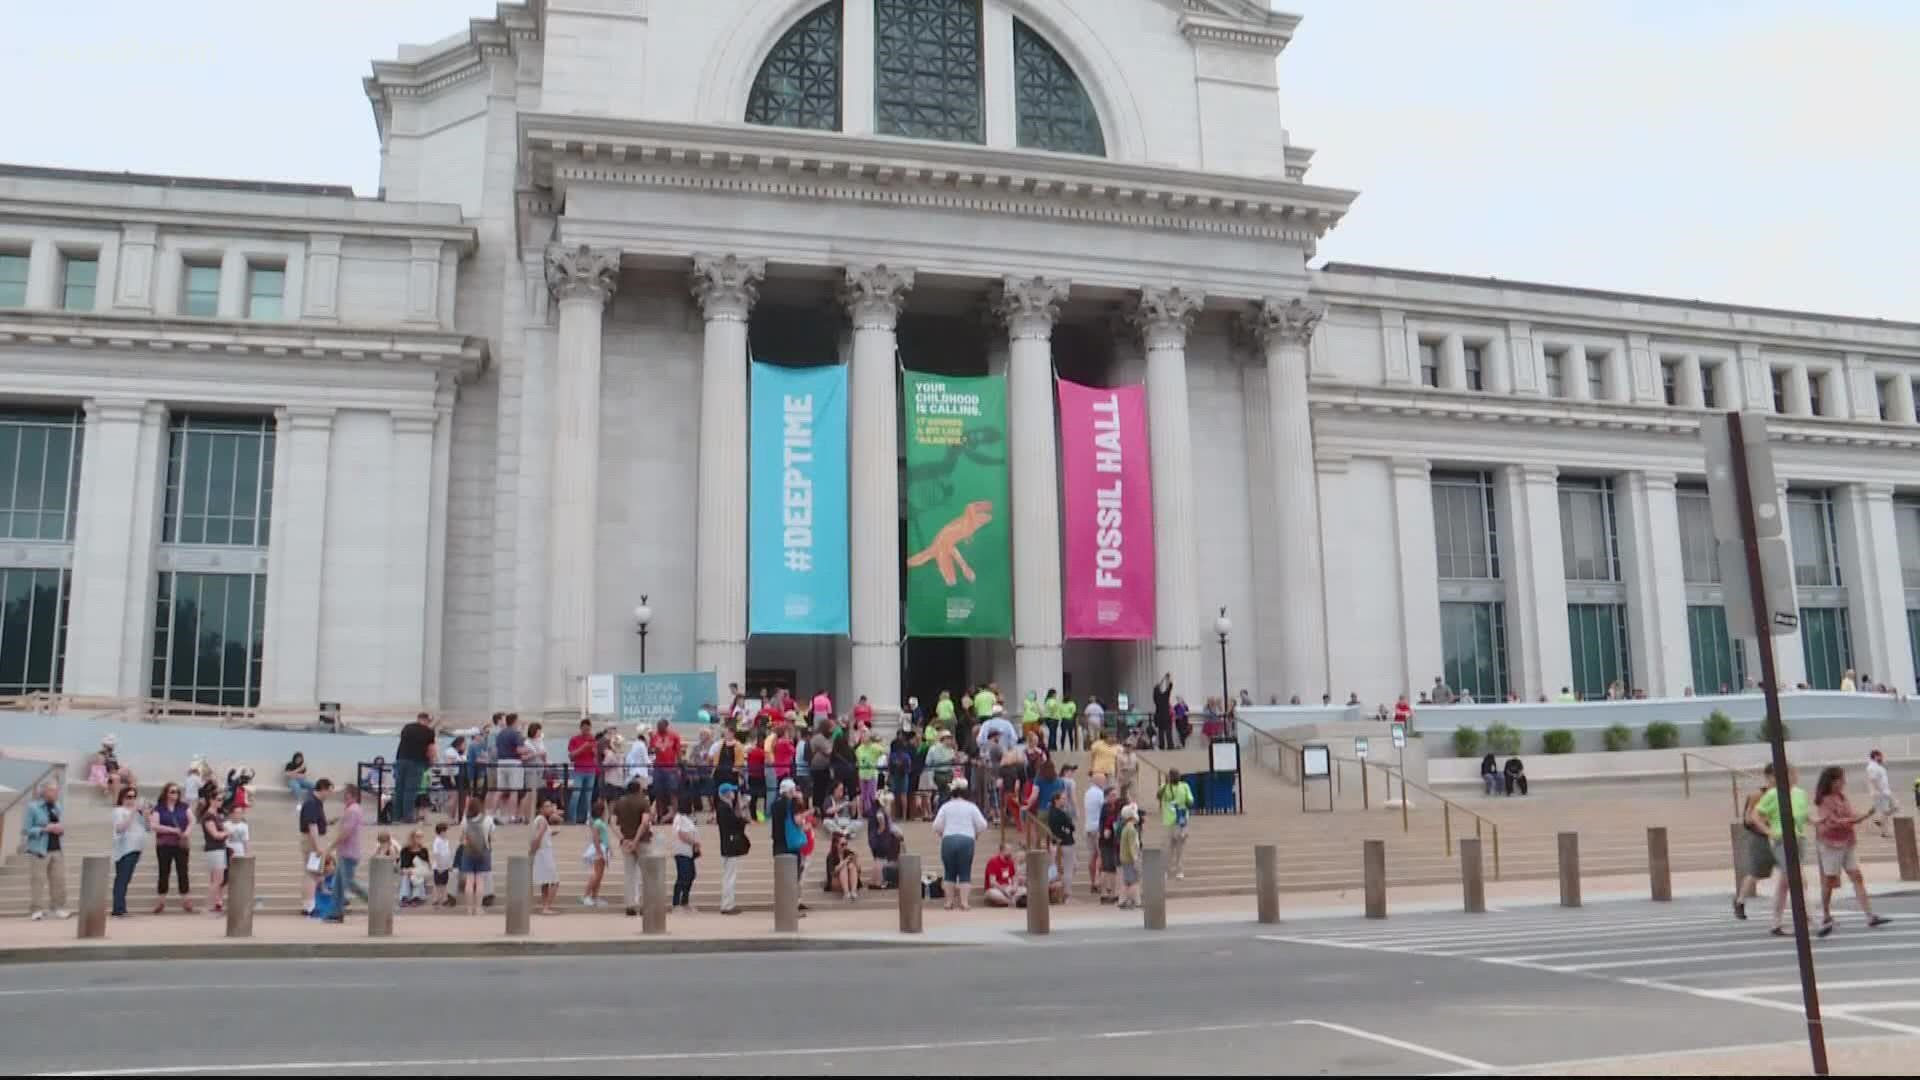 Skyrocketing coronavirus cases lead to staffing crisis at DC's national museums. Union wants the museums to close.